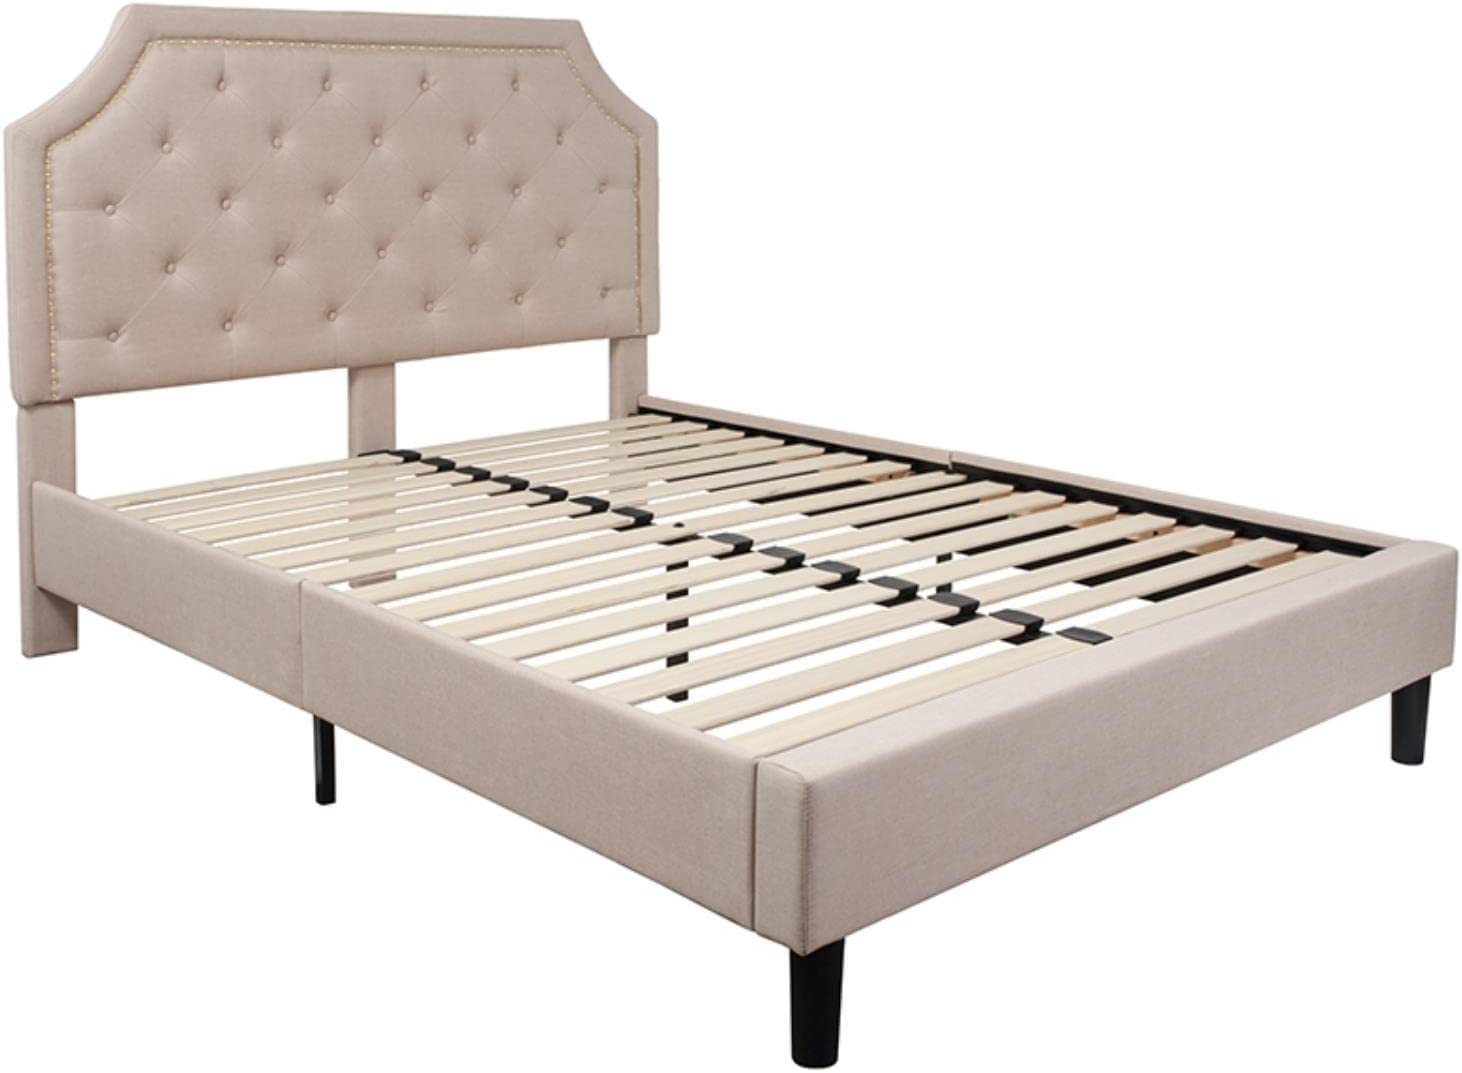 Primary image for Flash Furniture Brighton Queen Size Tufted Upholstered Platform Bed In Beige